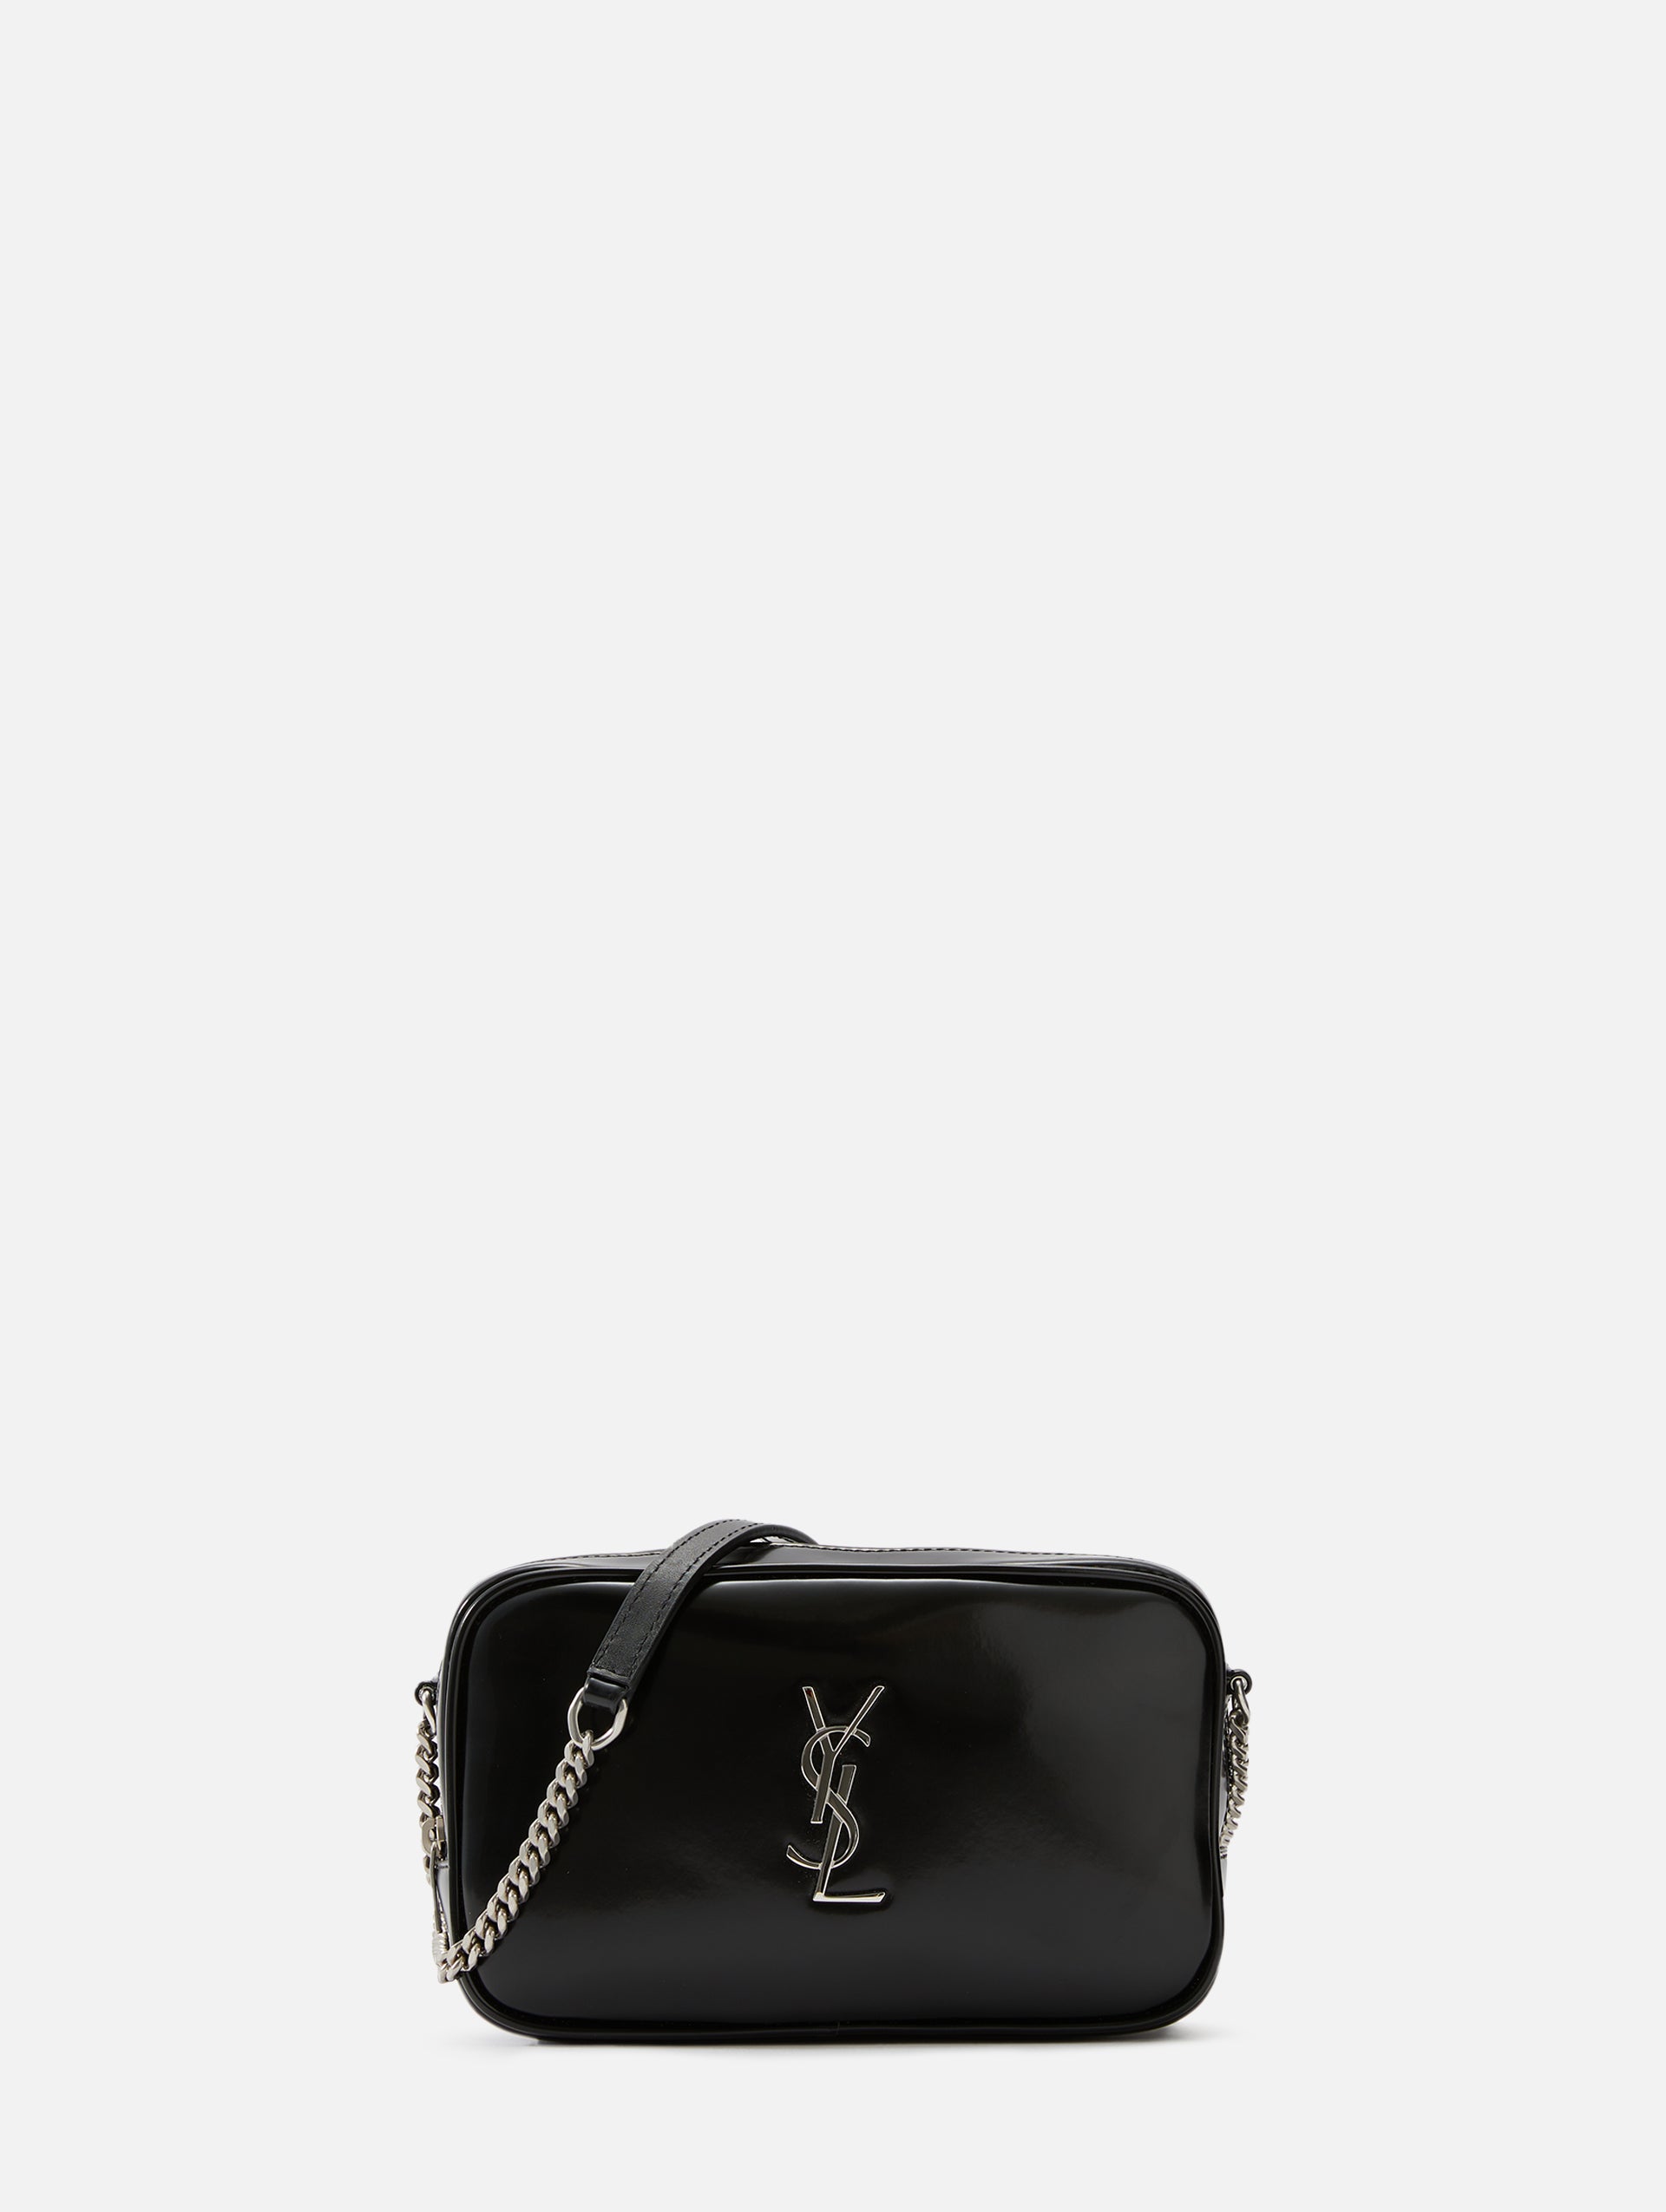 SAINT LAURENT Loulou small quilted leather shoulder bag | Shoulder bag  outfit, Shoulder bag, Purse outfit